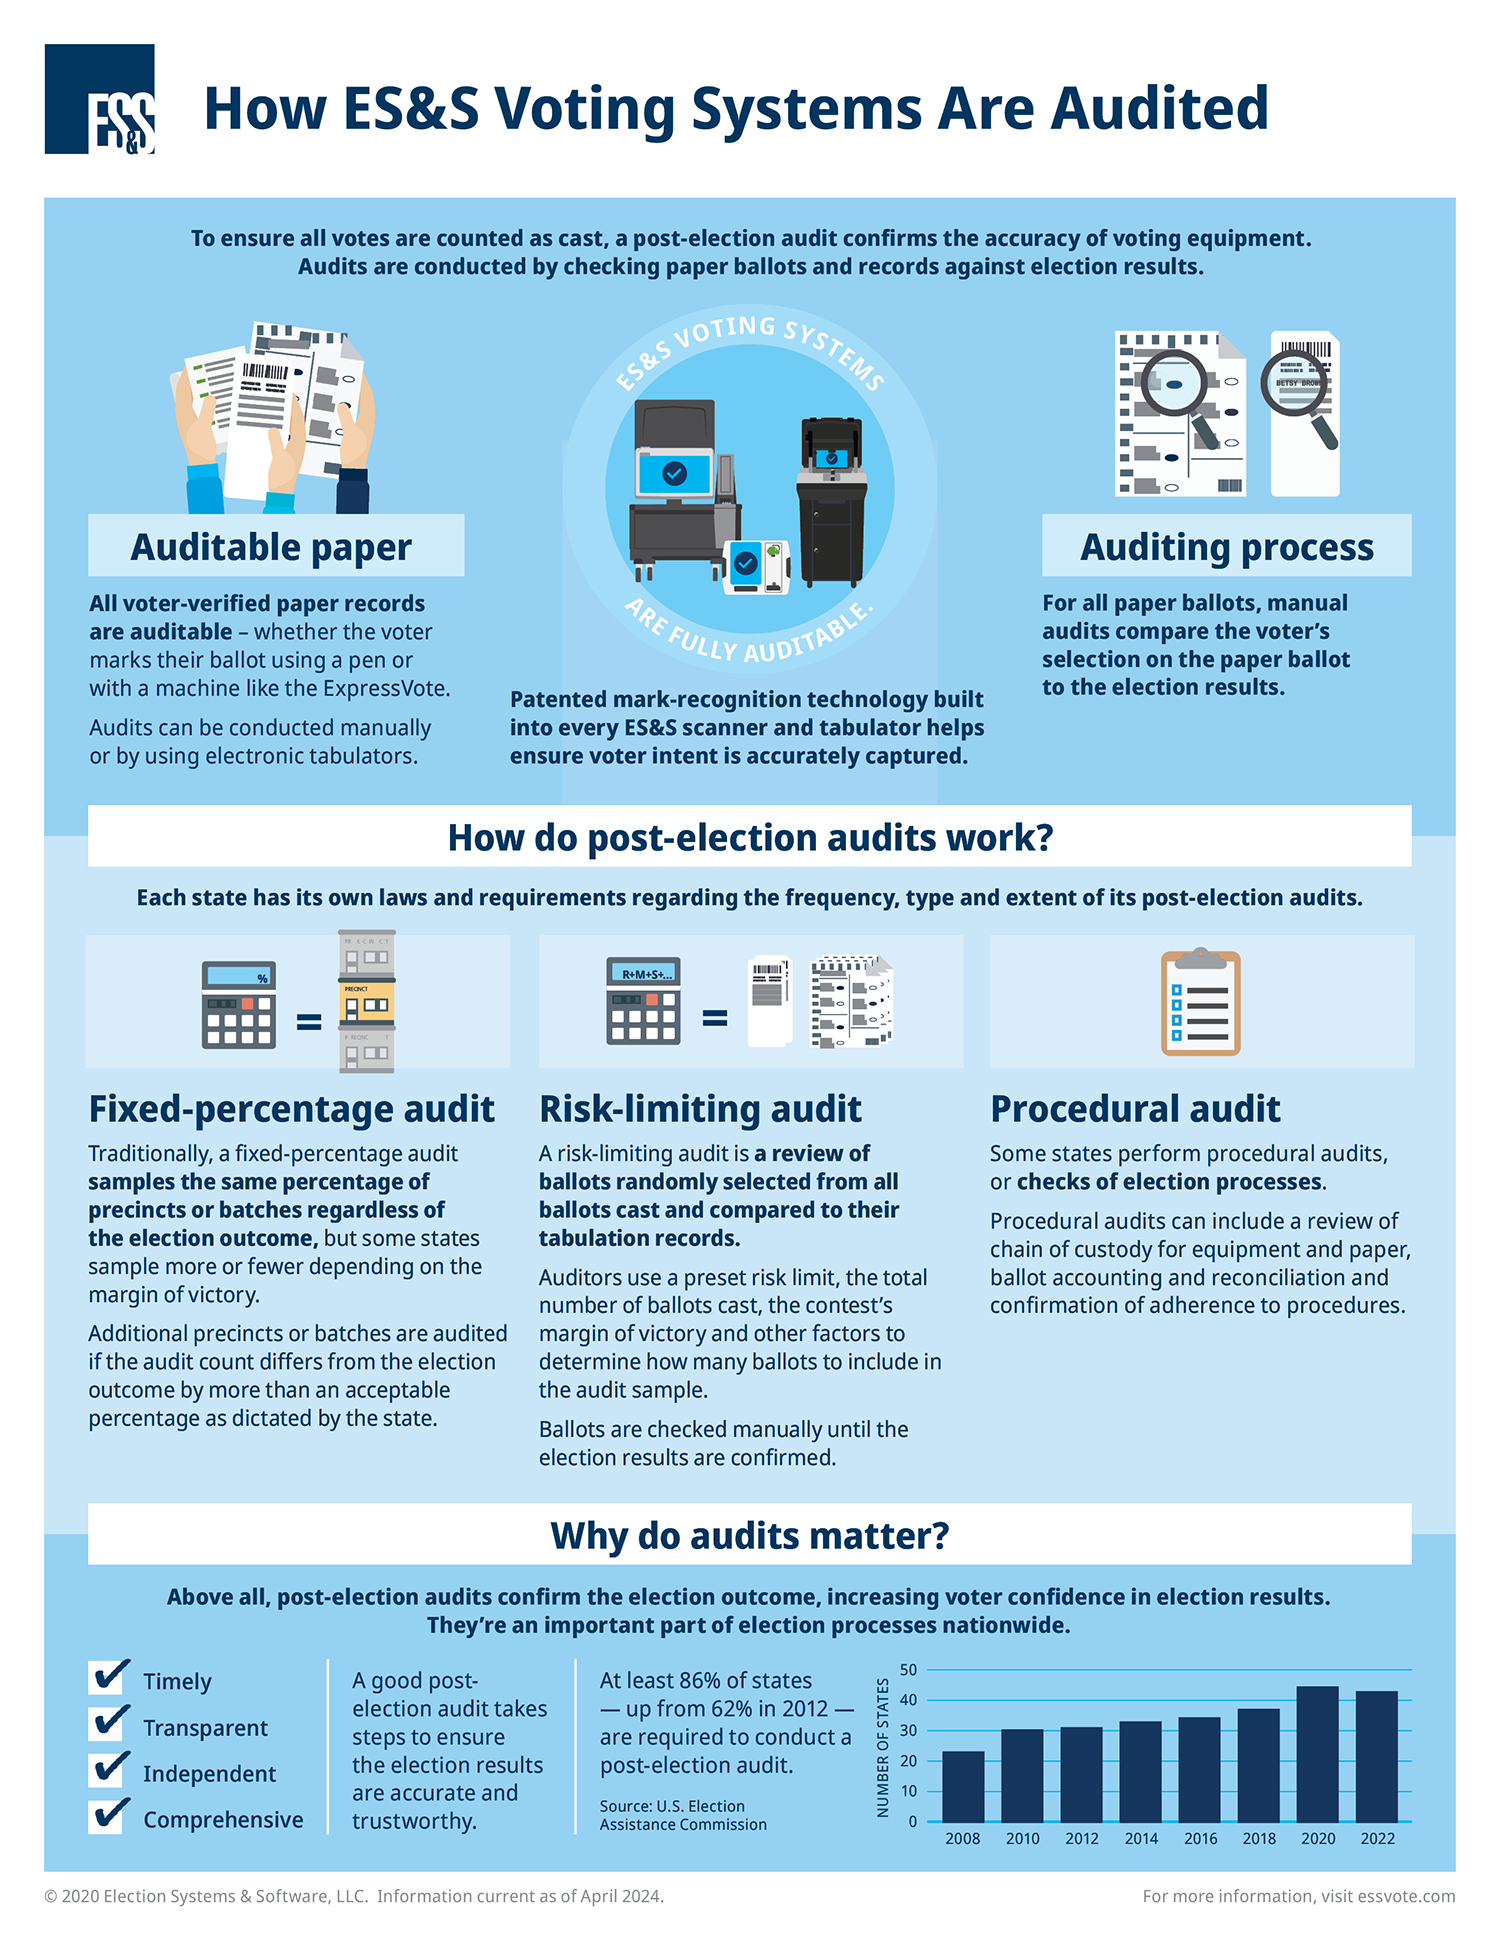 Infographic: How ES&S Voting Systems are Audited